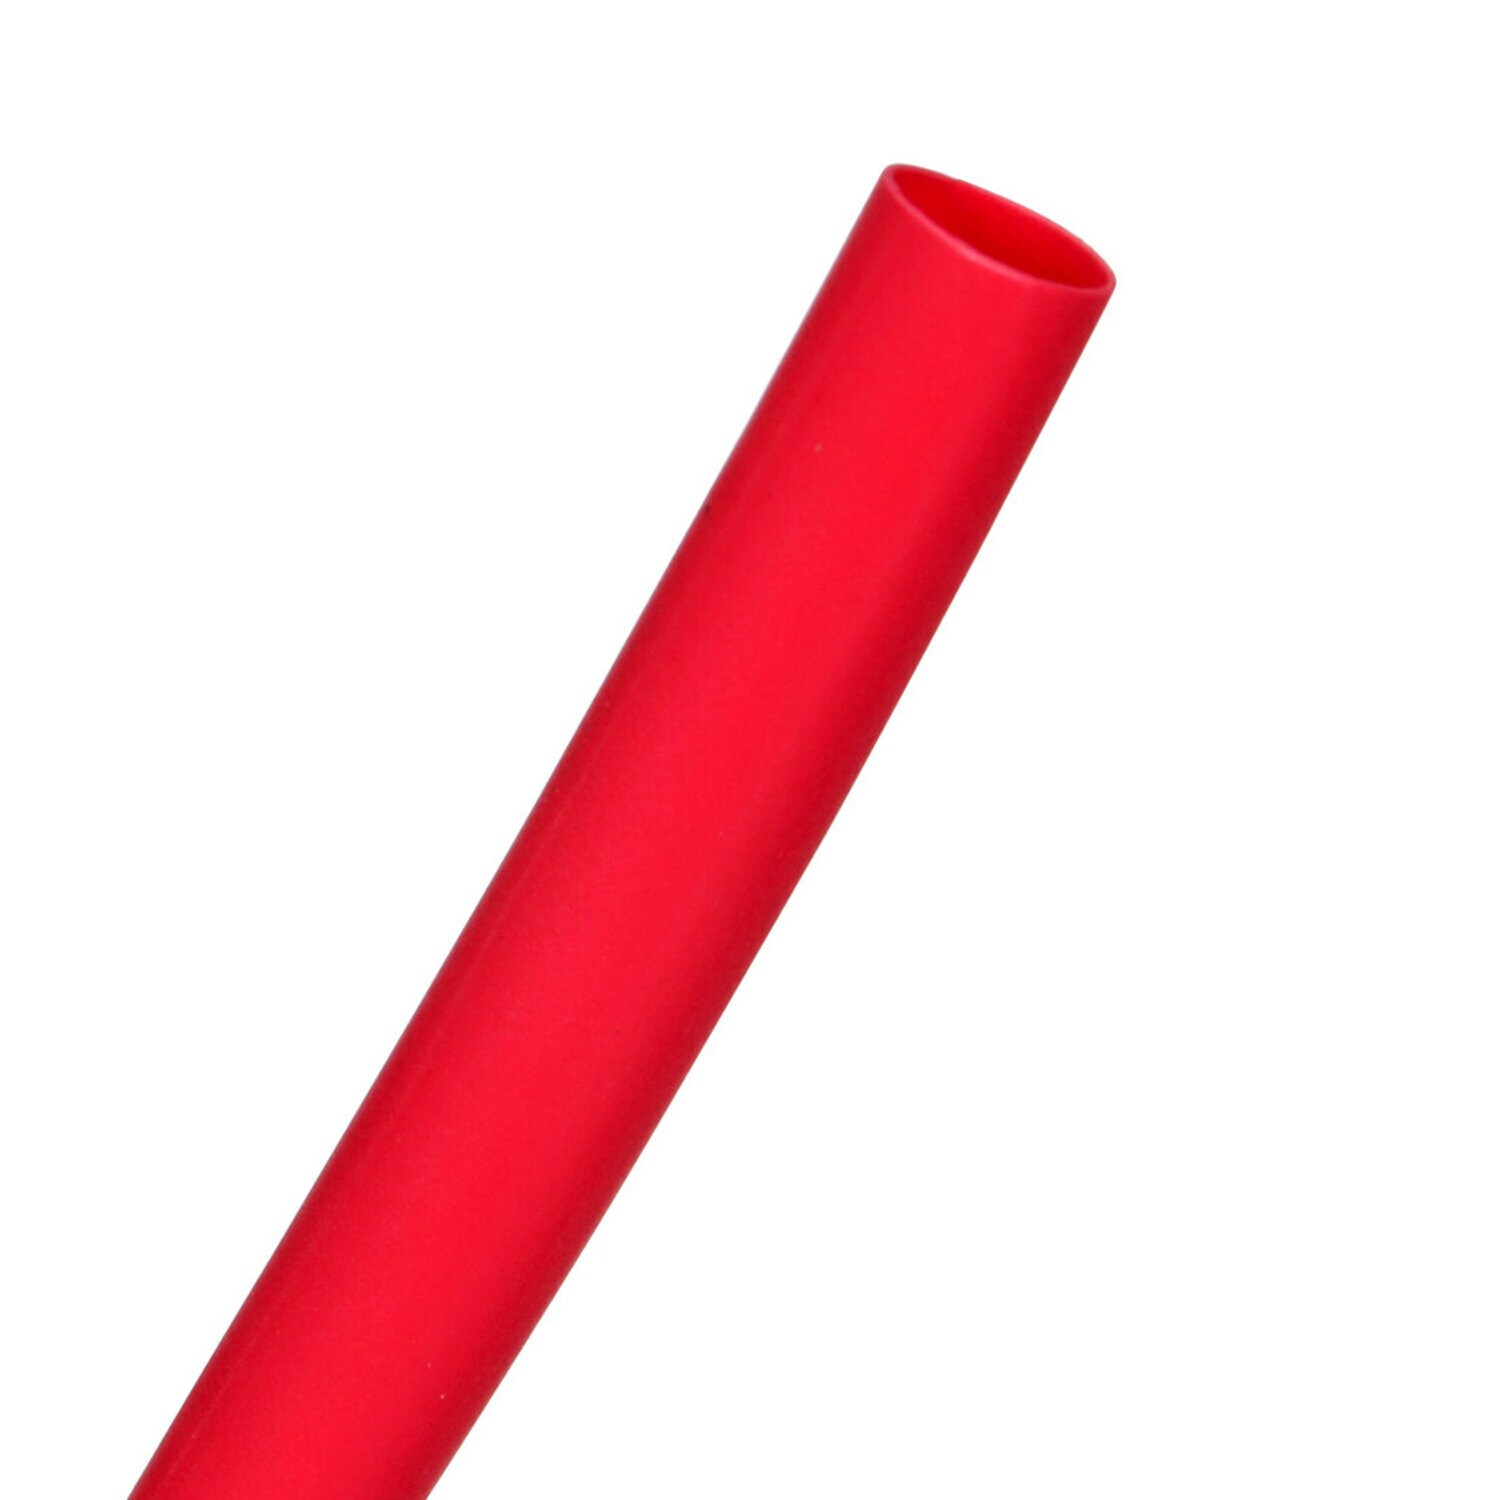 7010396214 - 3M Heat Shrink Thin-Wall Tubing FP-301-3/16-Red-250, 250 ft Spool, 3 Spools/Case